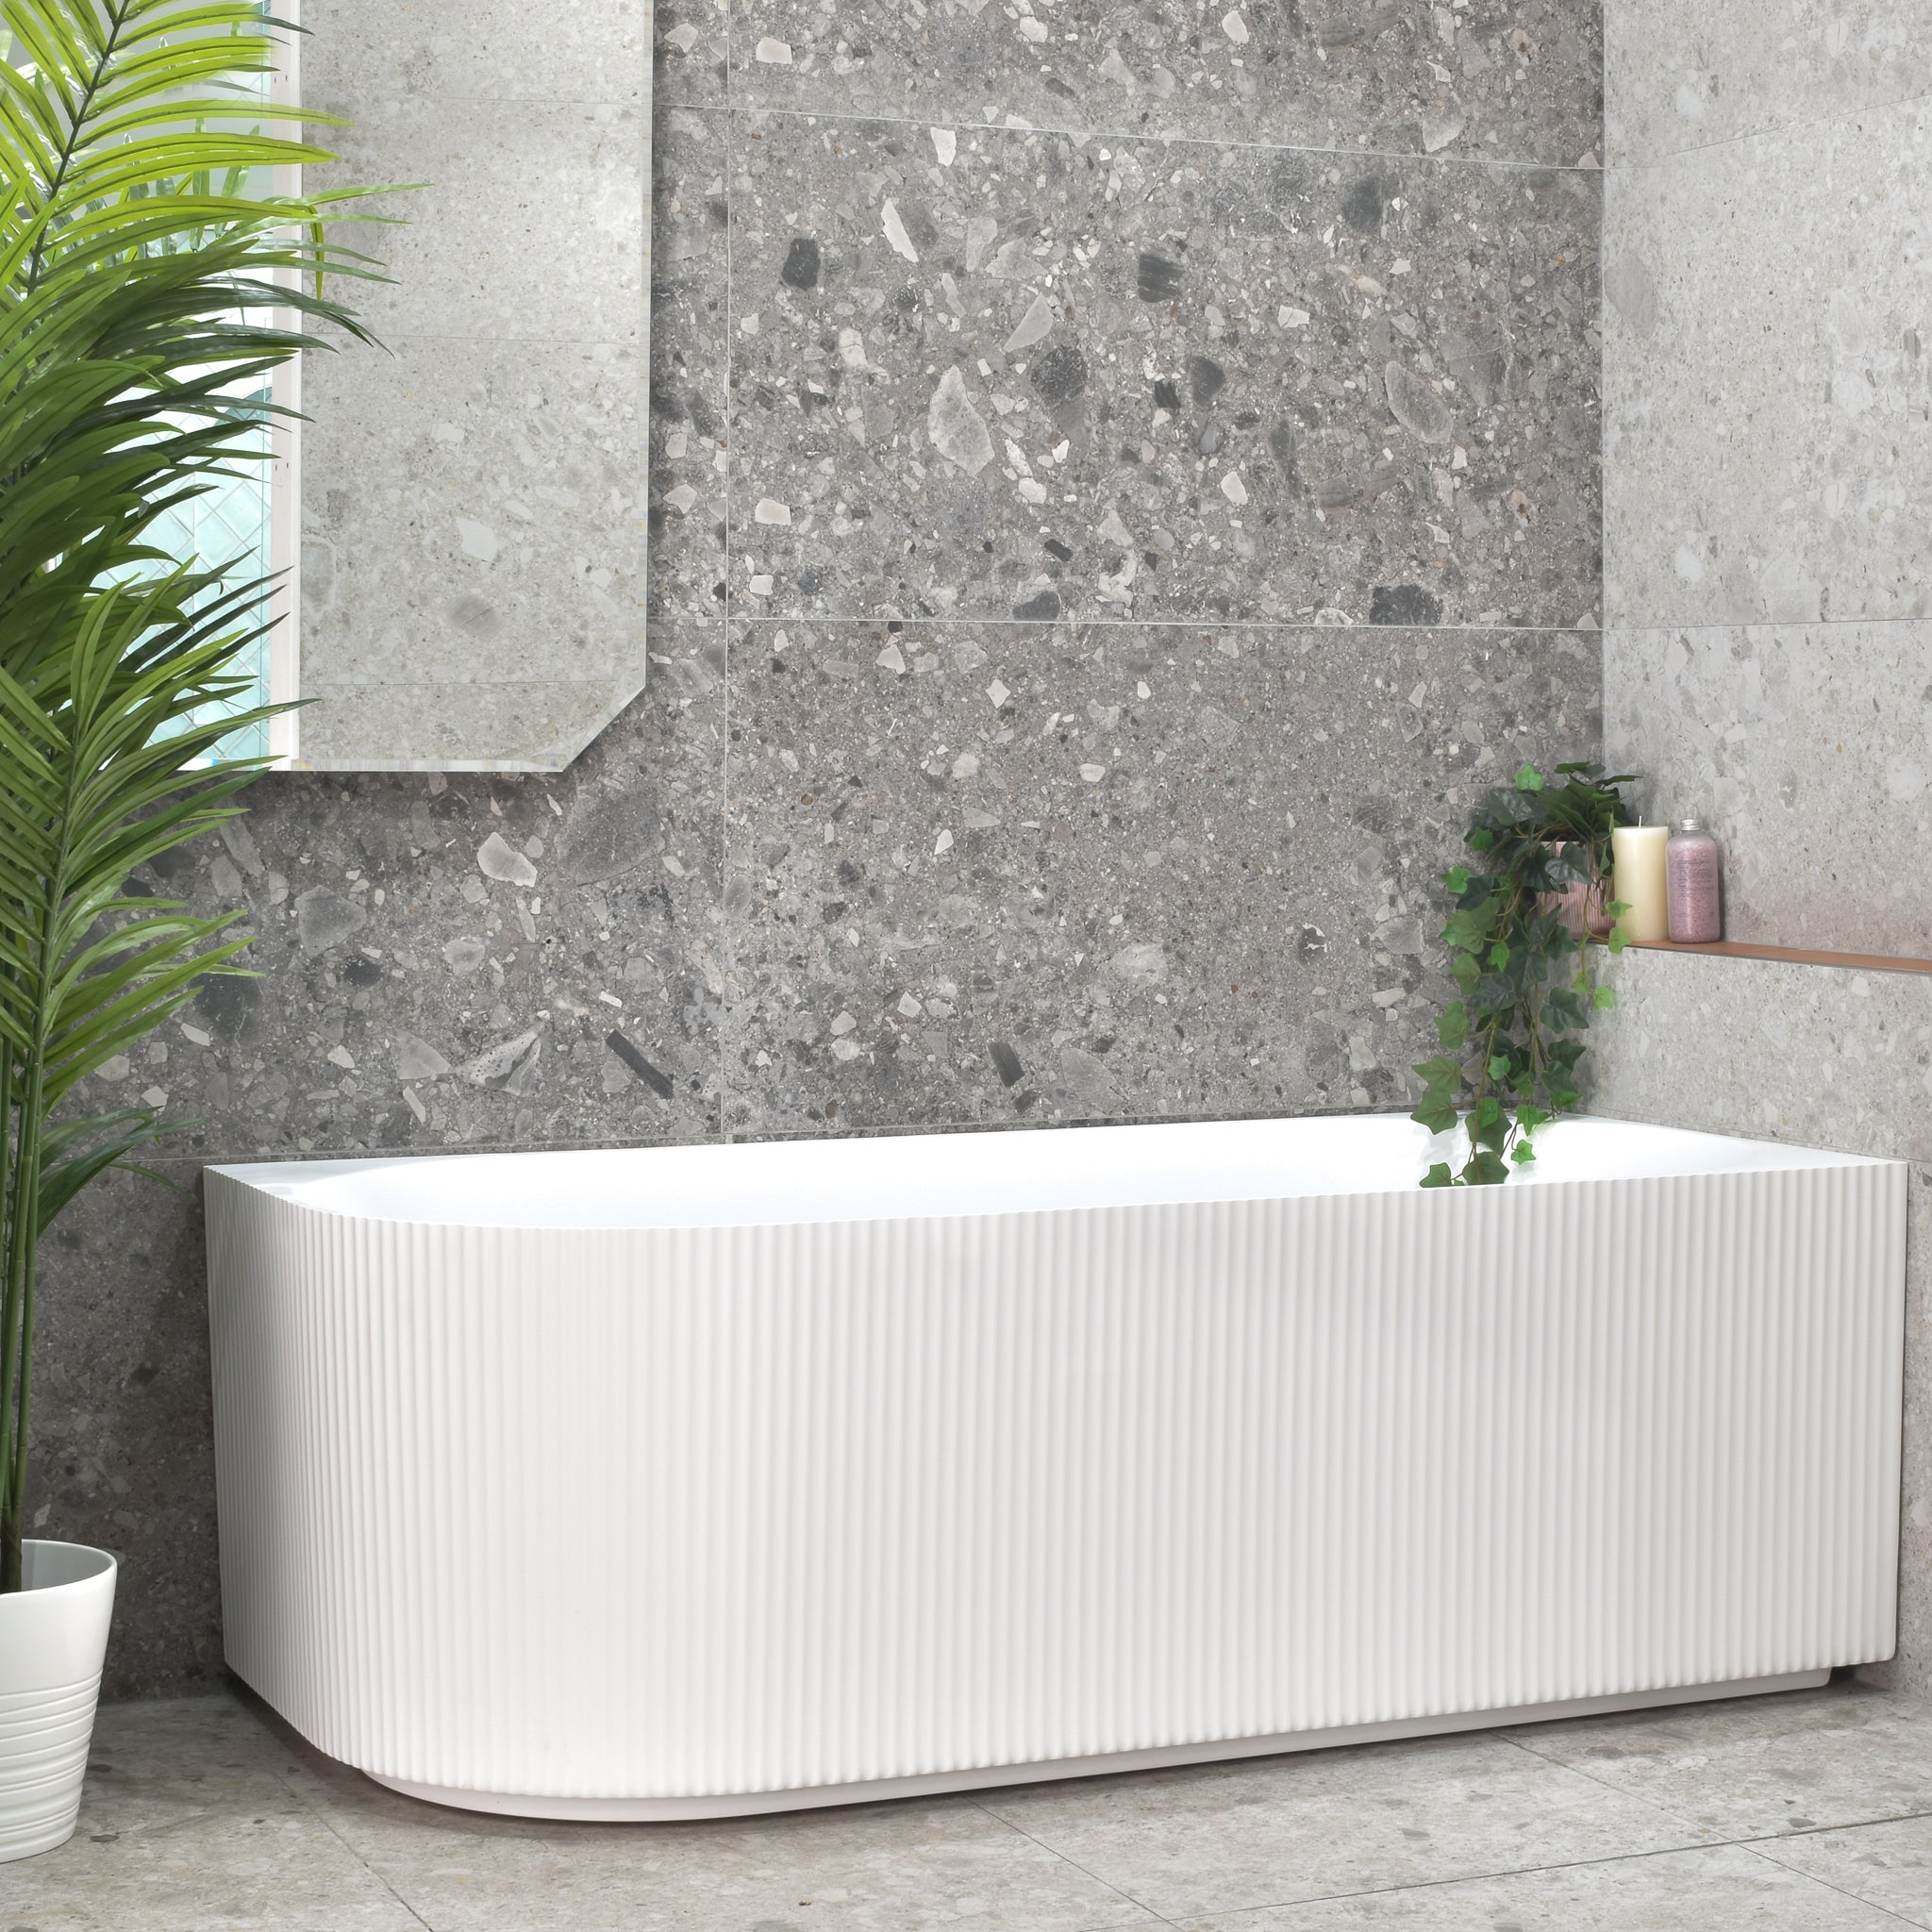 Brighton Groove 1500mm Fluted Oval Freestanding Right Corner Bath